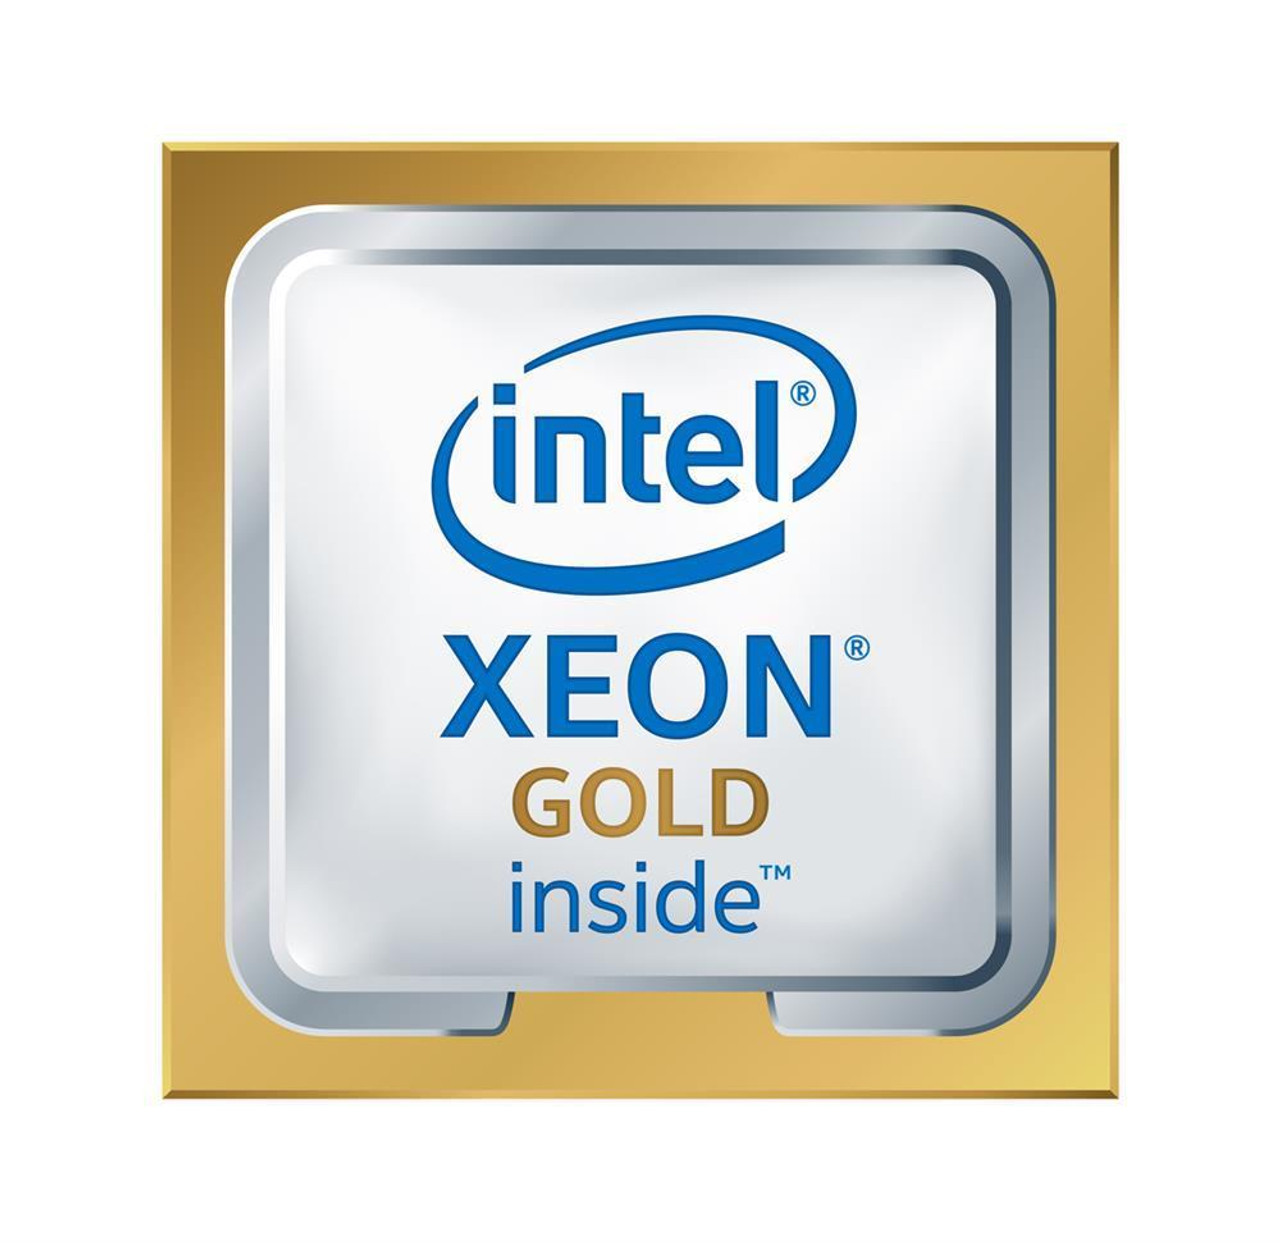 Gold 6252N Intel Xeon Gold 24-Core 2.30GHz 35.75MB Cache Processor Gold